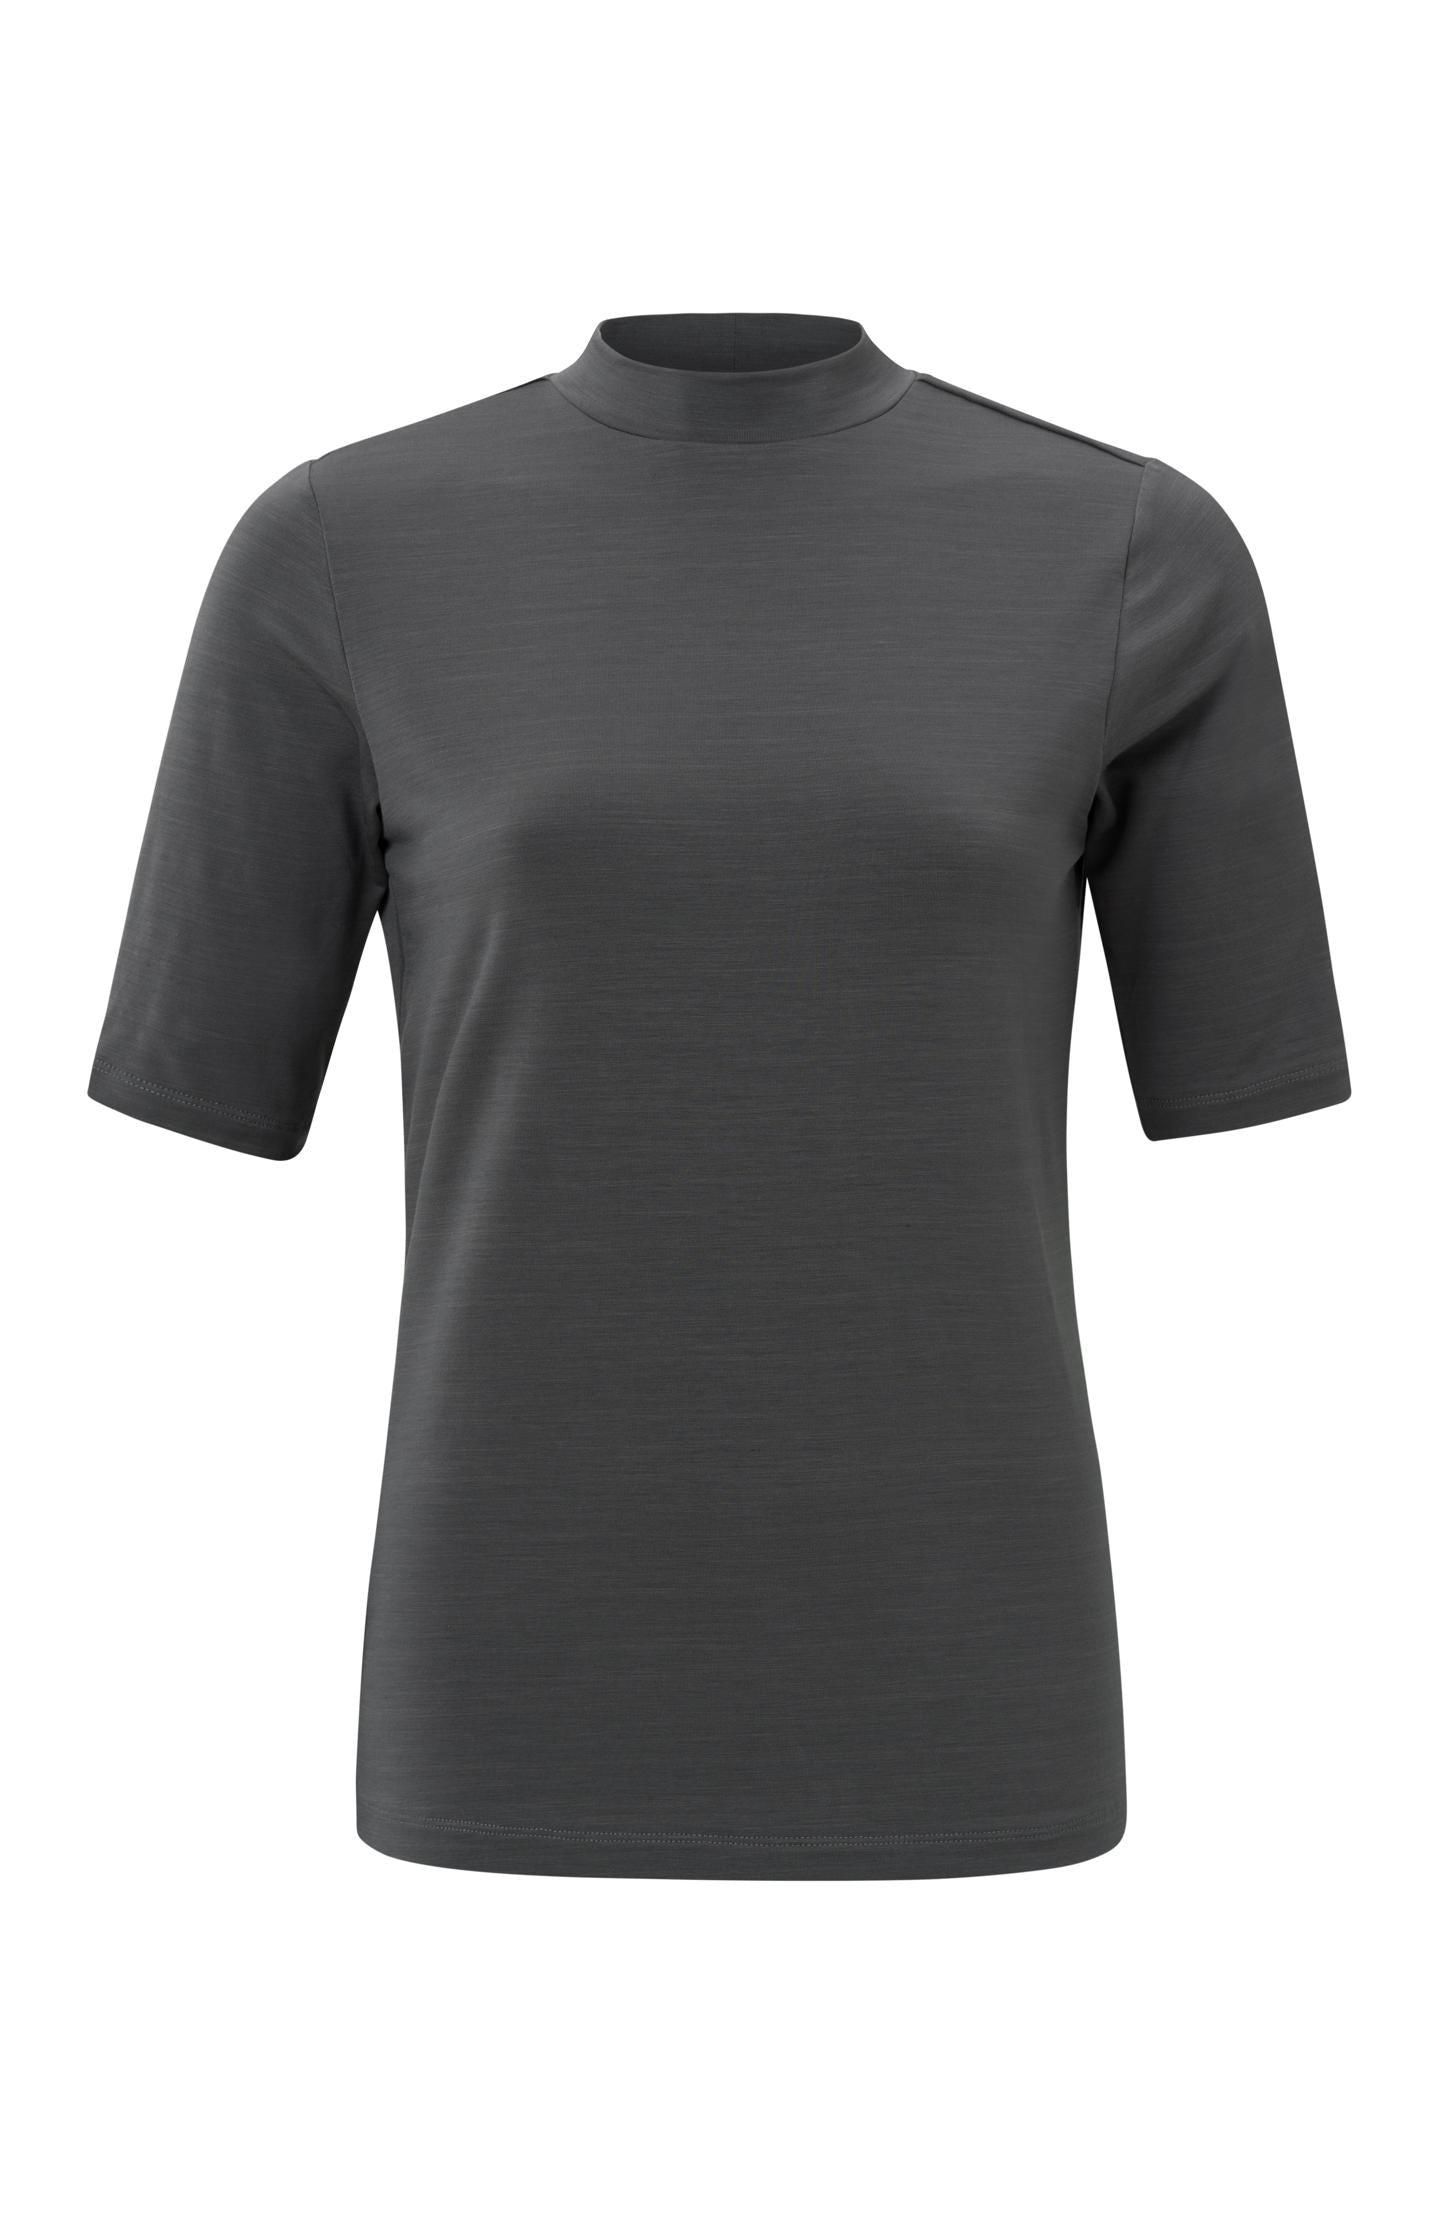 Soft T-shirt with turtleneck and short sleeve in regular fit - Type: product